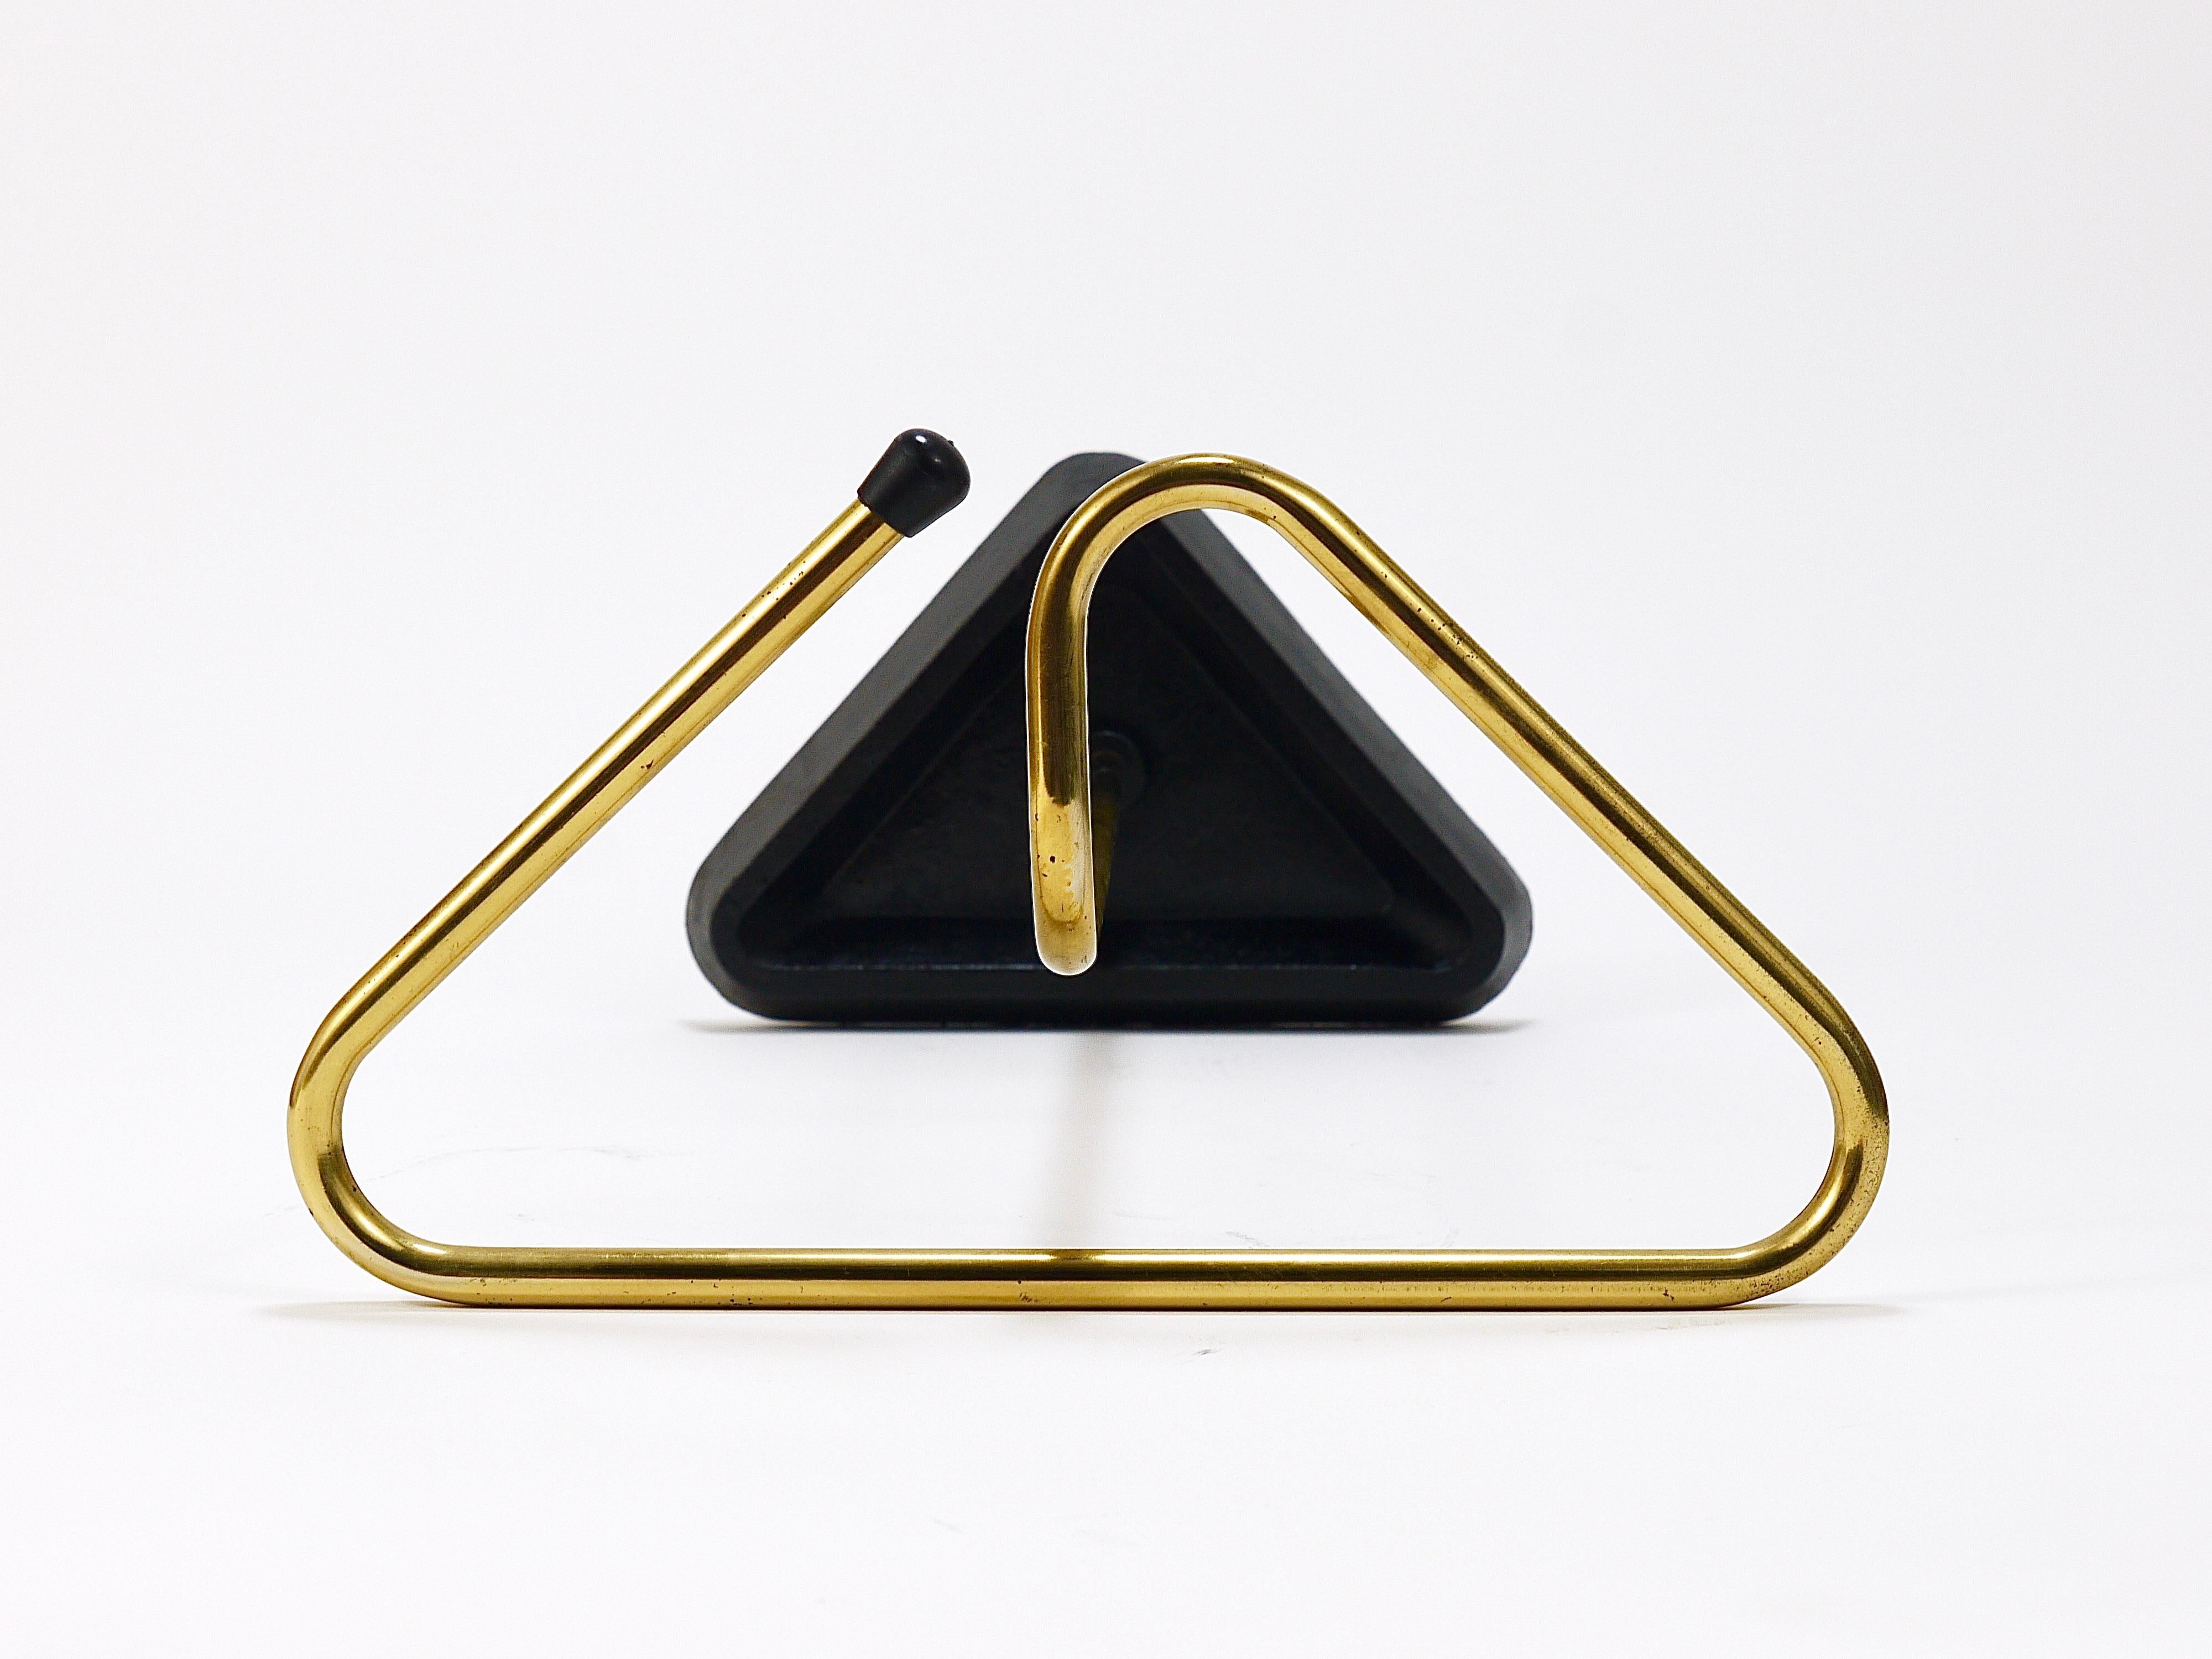 A lovely Austrian modernist umbrella stand or or walking stick holder from the 1950s. Made in Vienna, Austria. Made of  brass with a solid black cast iron base. A decorative umbrella stand with a wonderful triangular shape in good condition with